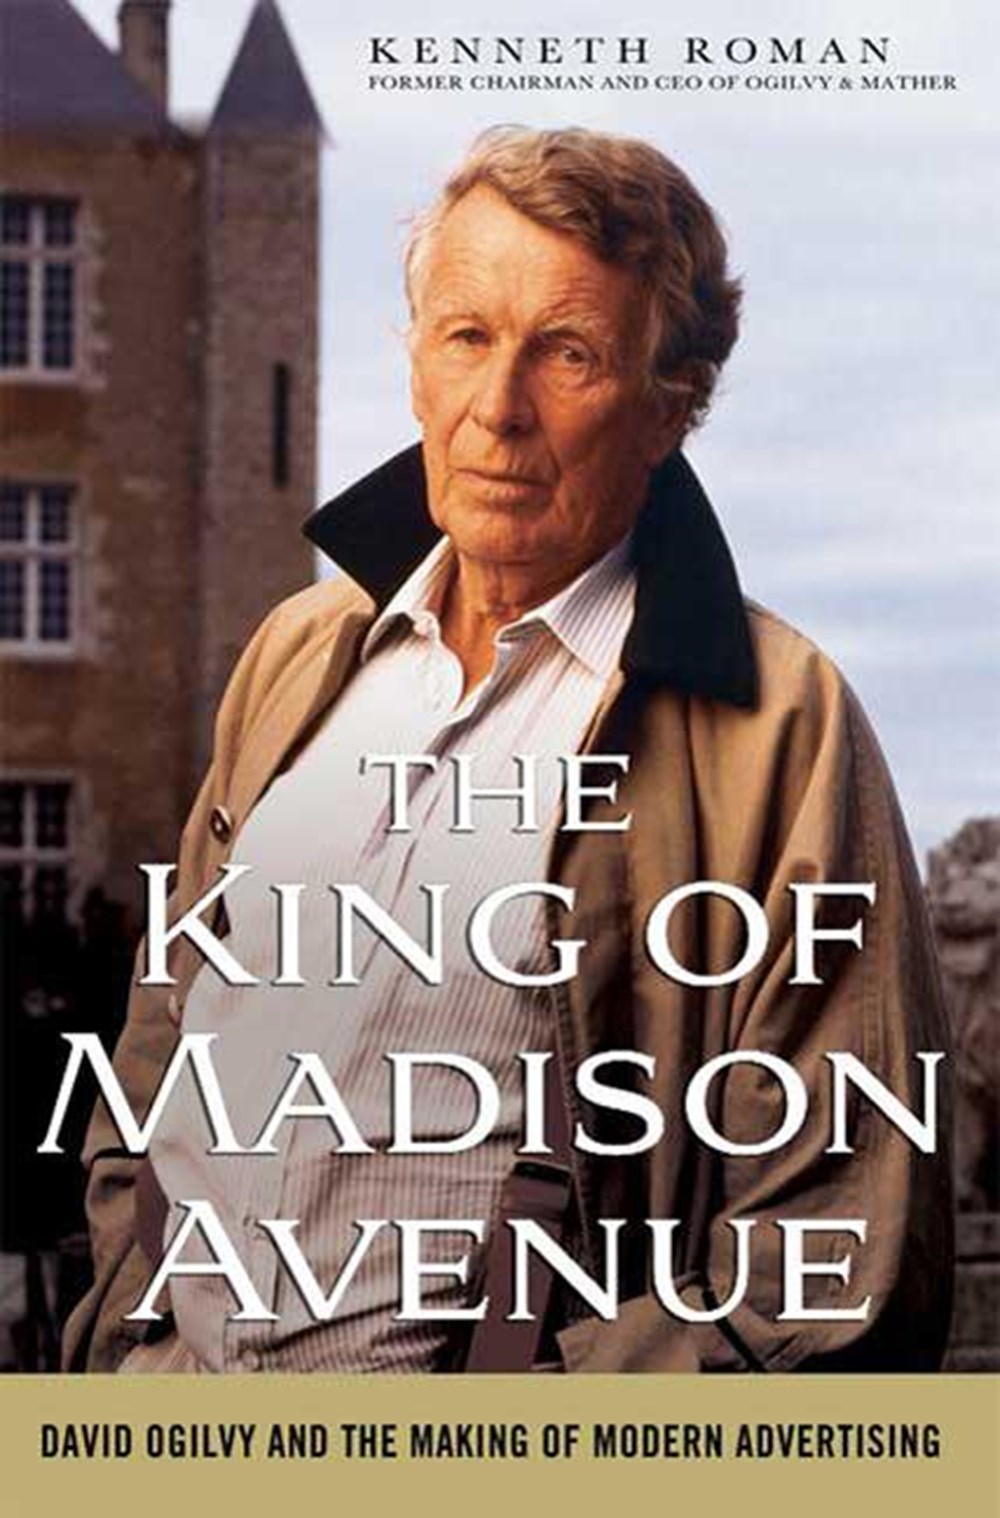 King of Madison Avenue: David Ogilvy and the Making of Modern Advertising